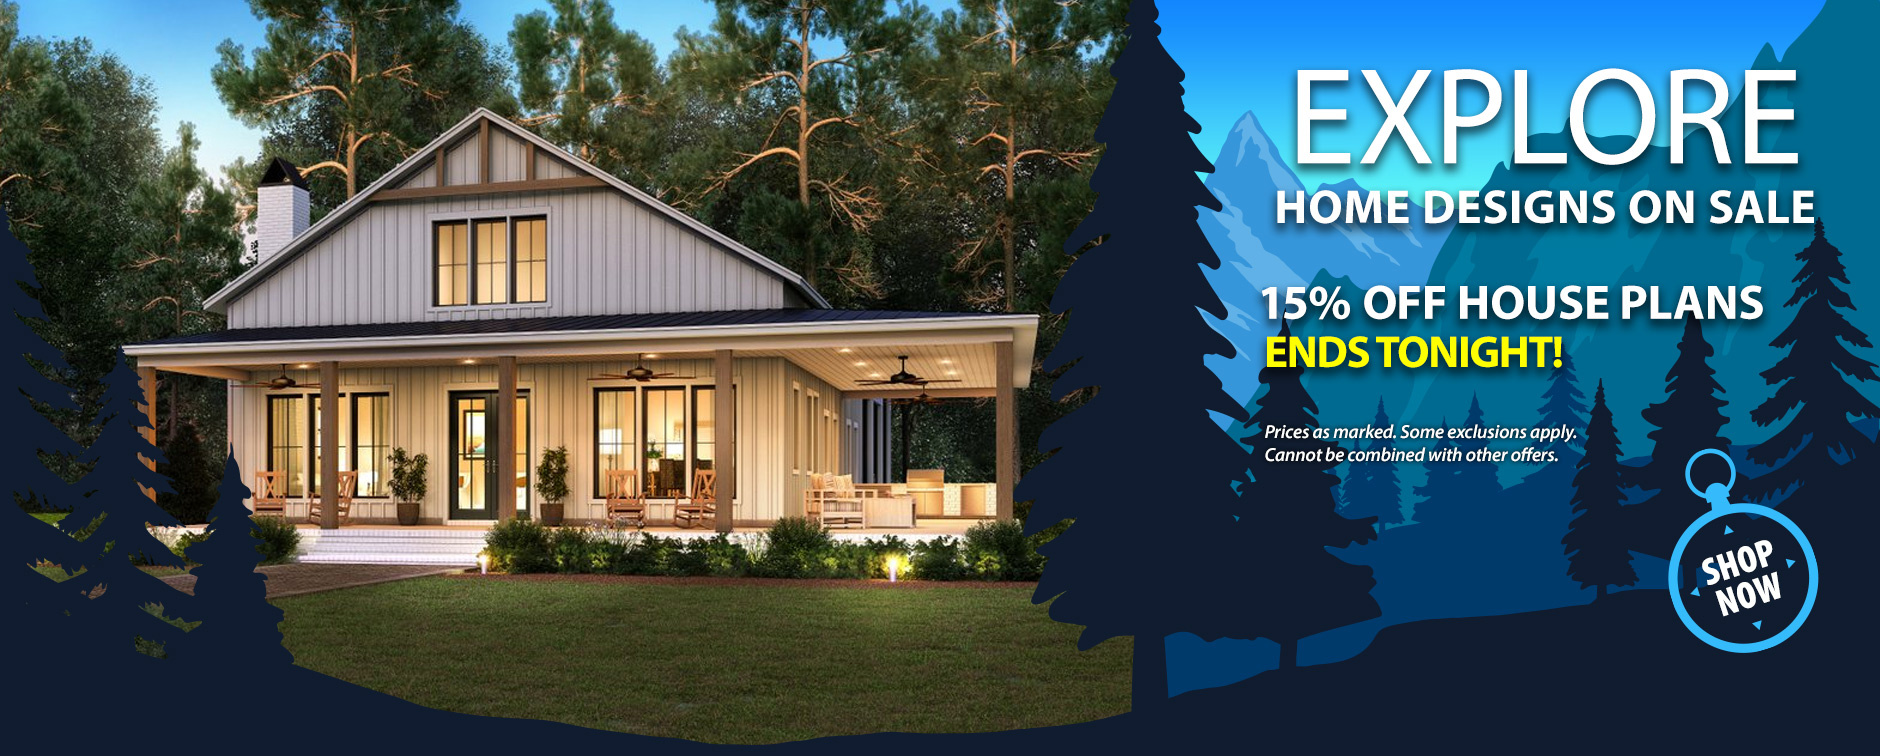 Explore Home Designs on Sale: 15% Off House Plans. Final Hours.